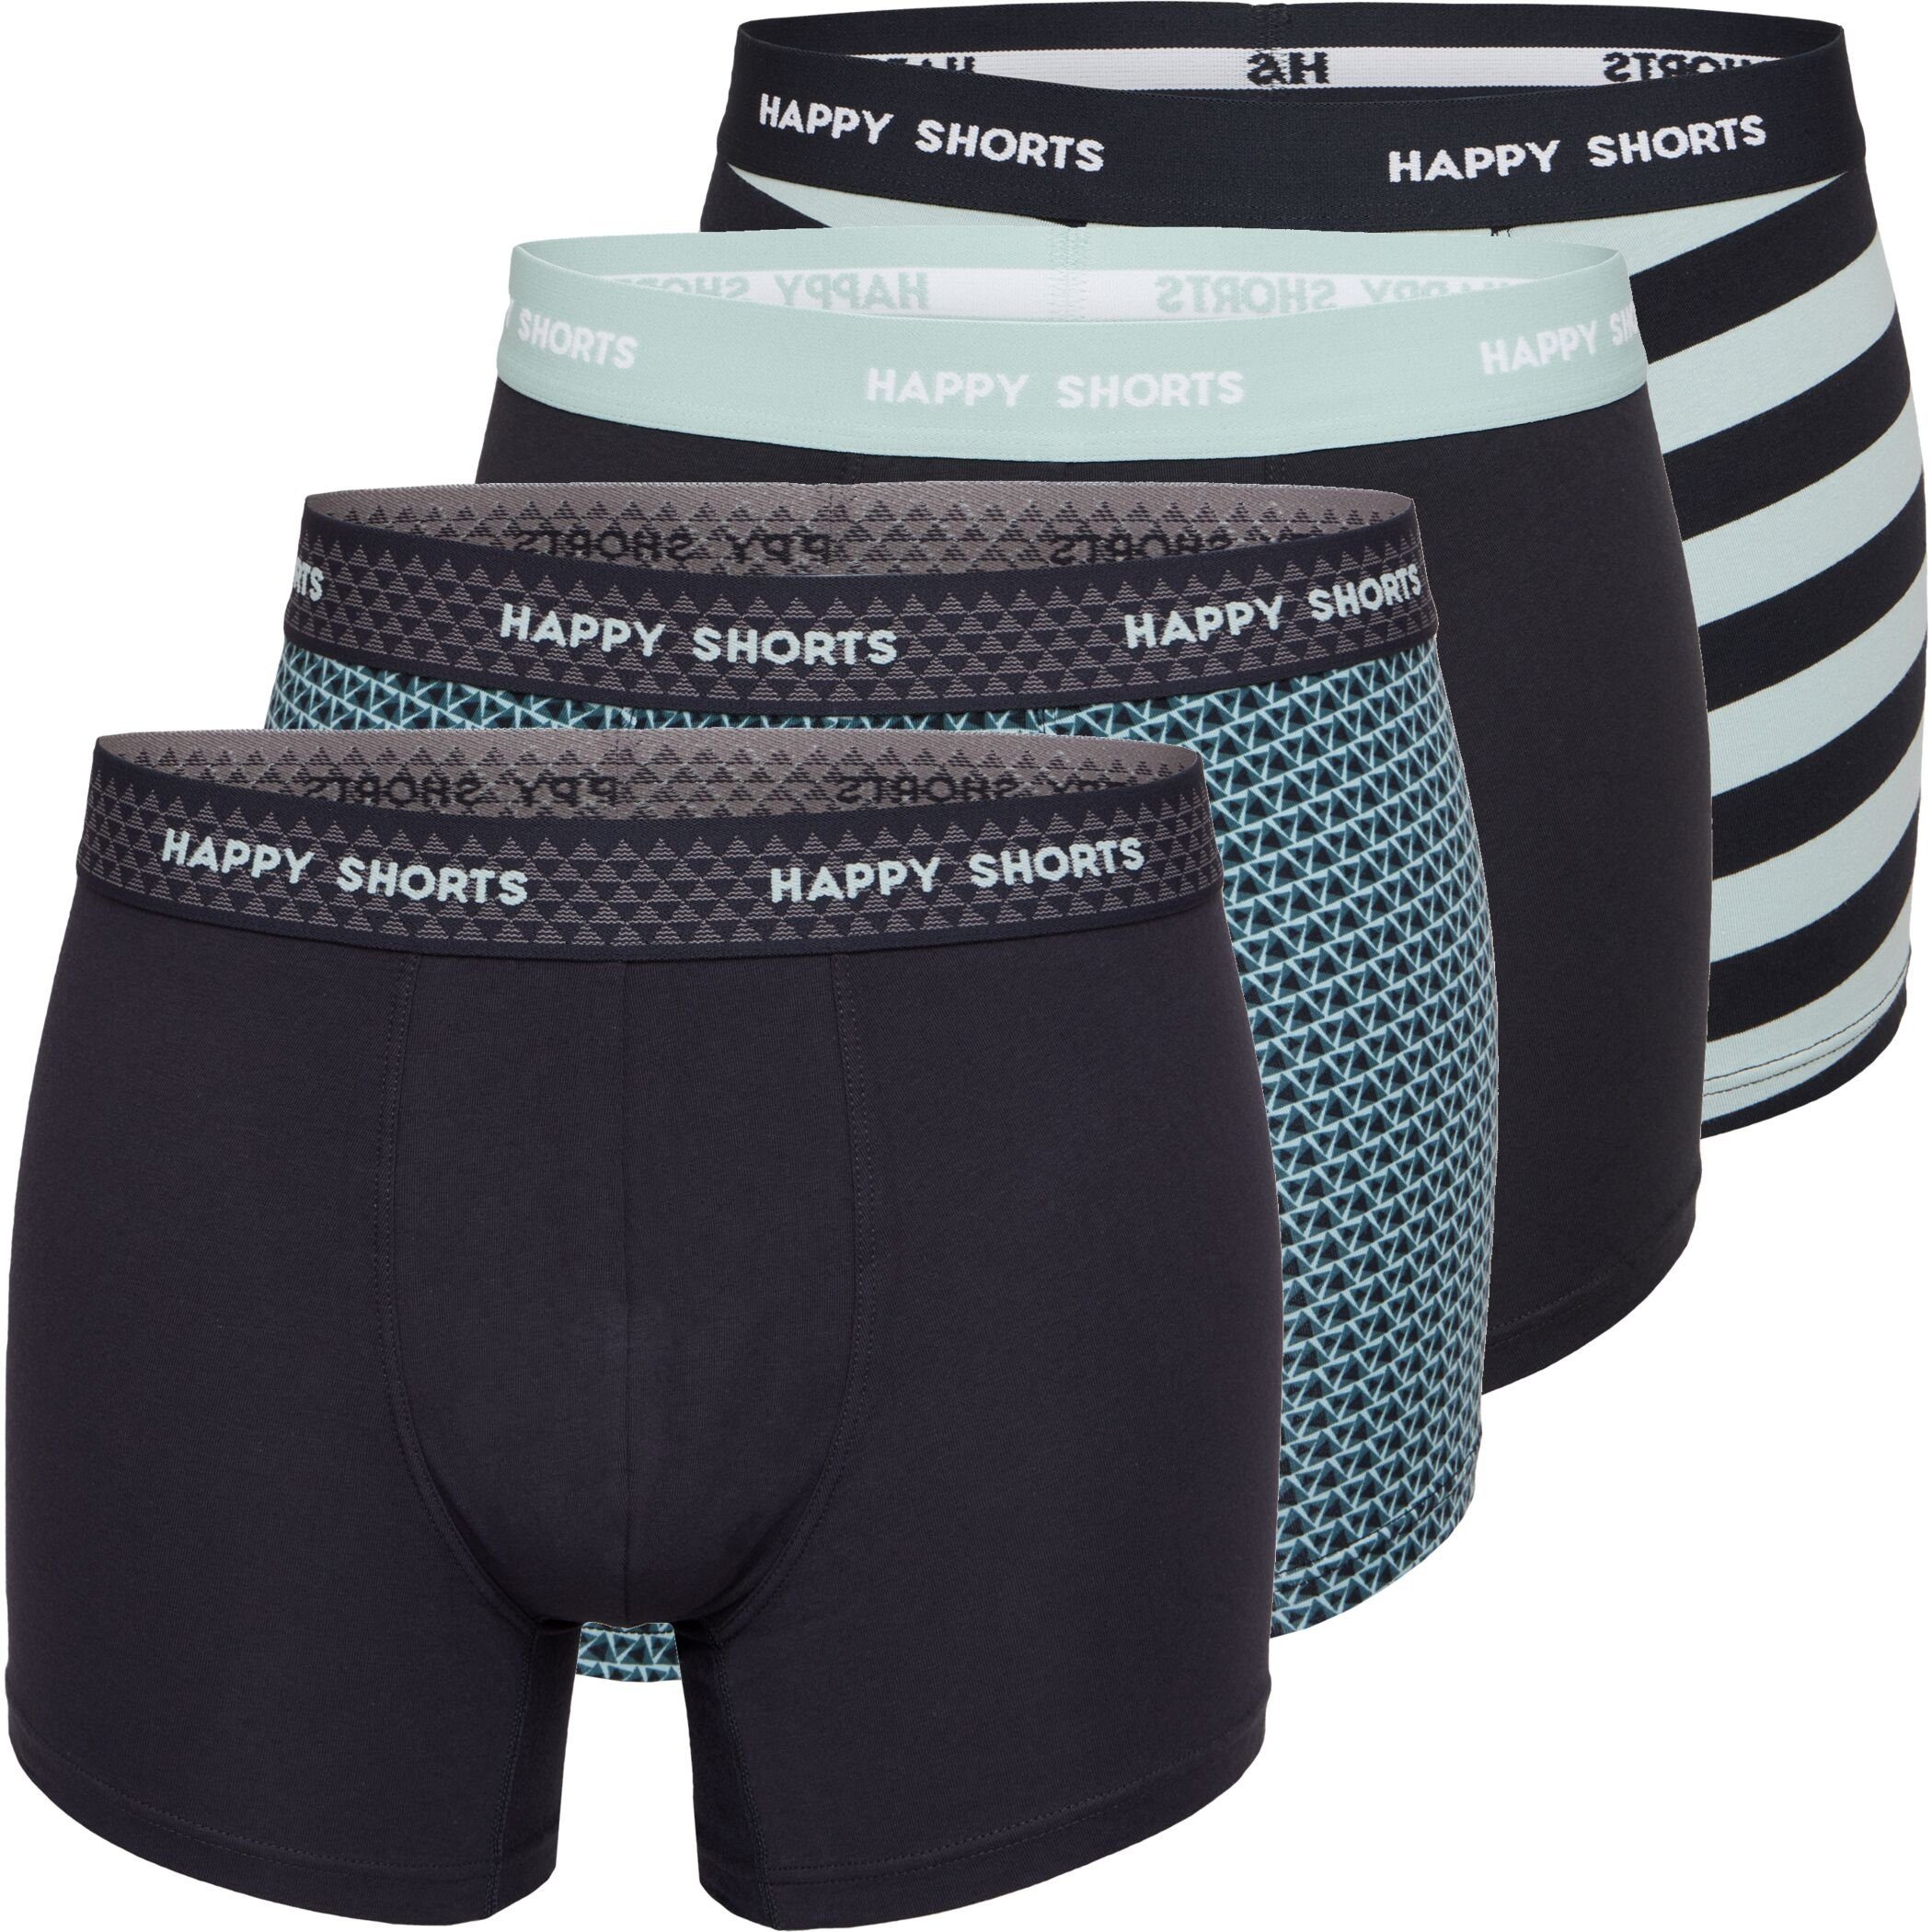 SHORTS Happy Pant (1-St) Jersey Trunk Sparpack Boxershorts Trunk 4er Pants Herren Shorts HAPPY